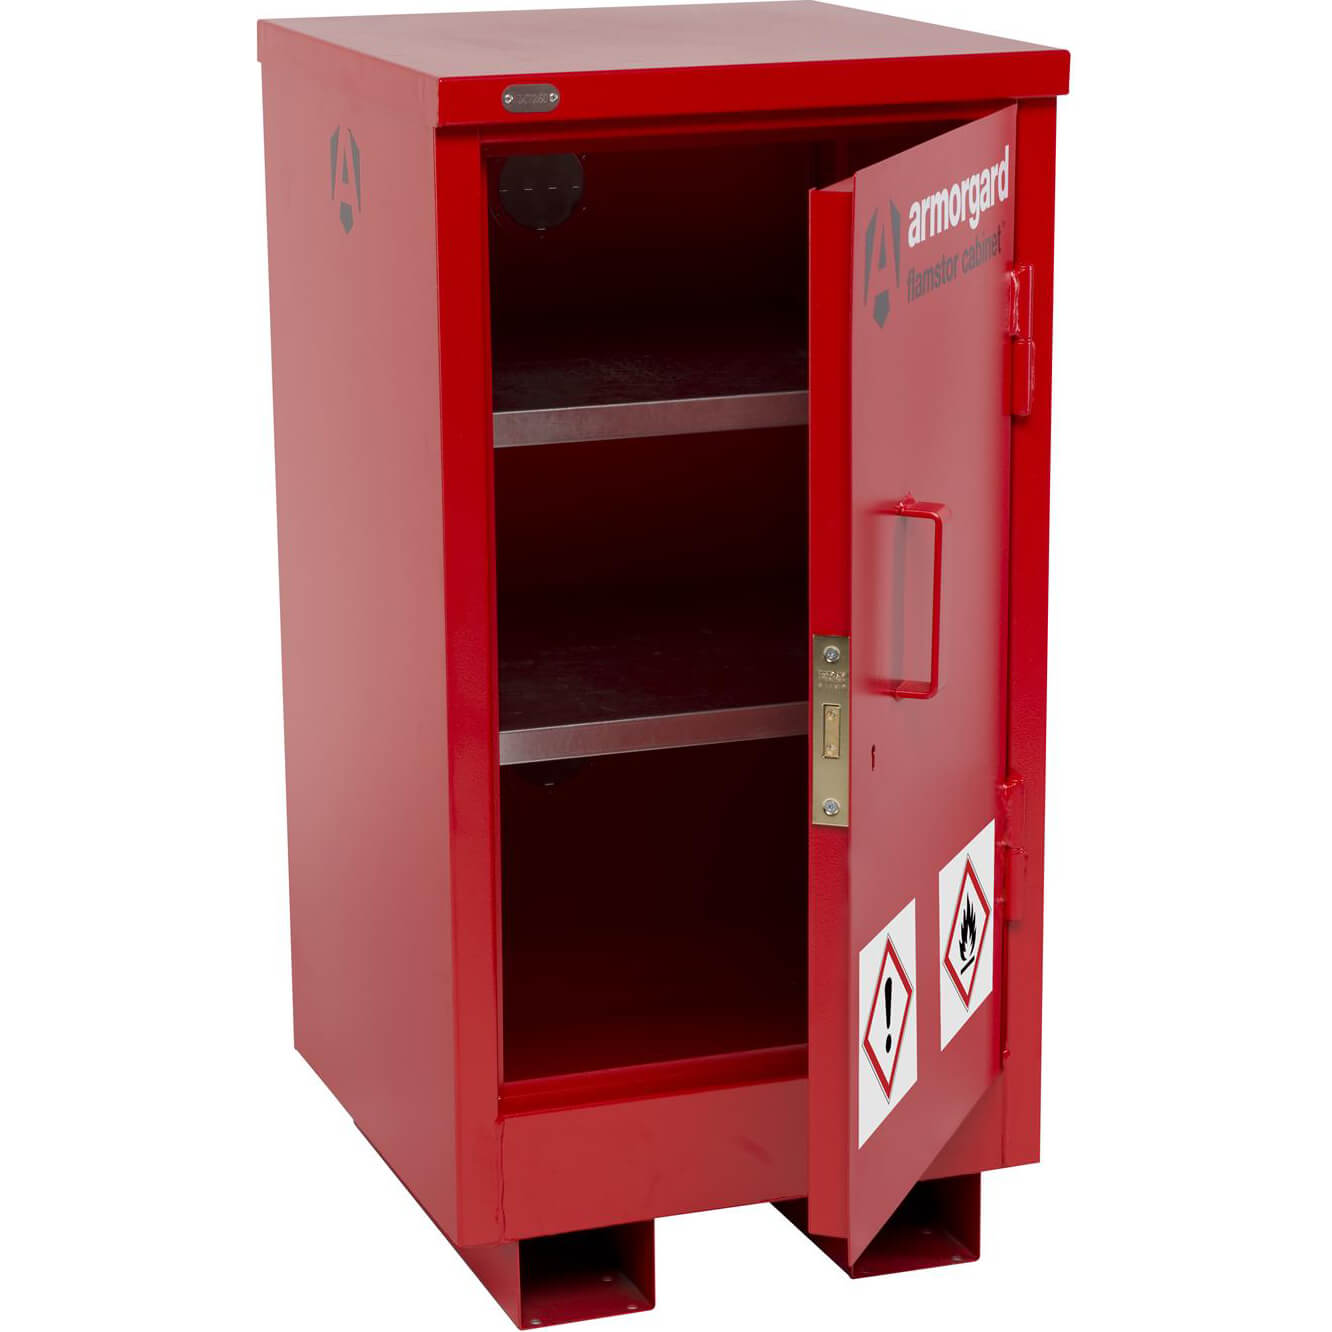 Photo of Armorgard Flamstor Chemical And Flammables Hazardous Cabinet 2500mm 750mm 2300mm